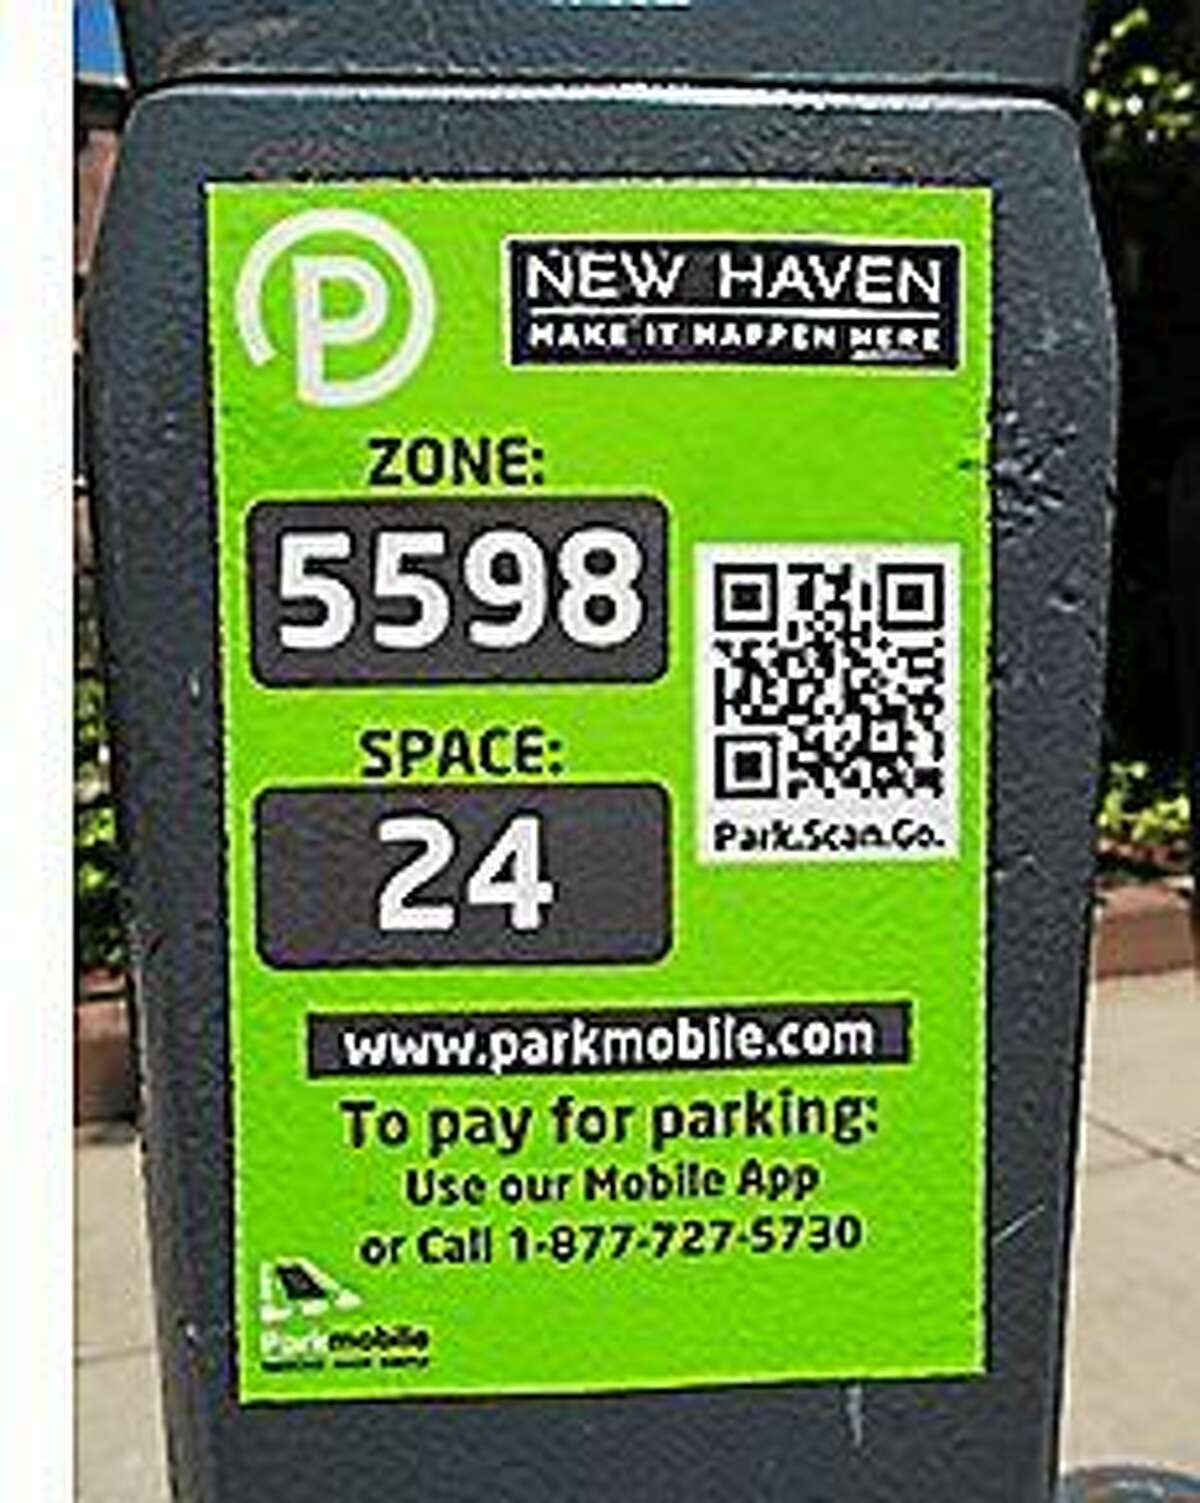 The city of Middletown Parking Department has signed a contract with Parkmobile to use its app, which makes paying for street spaces easy.